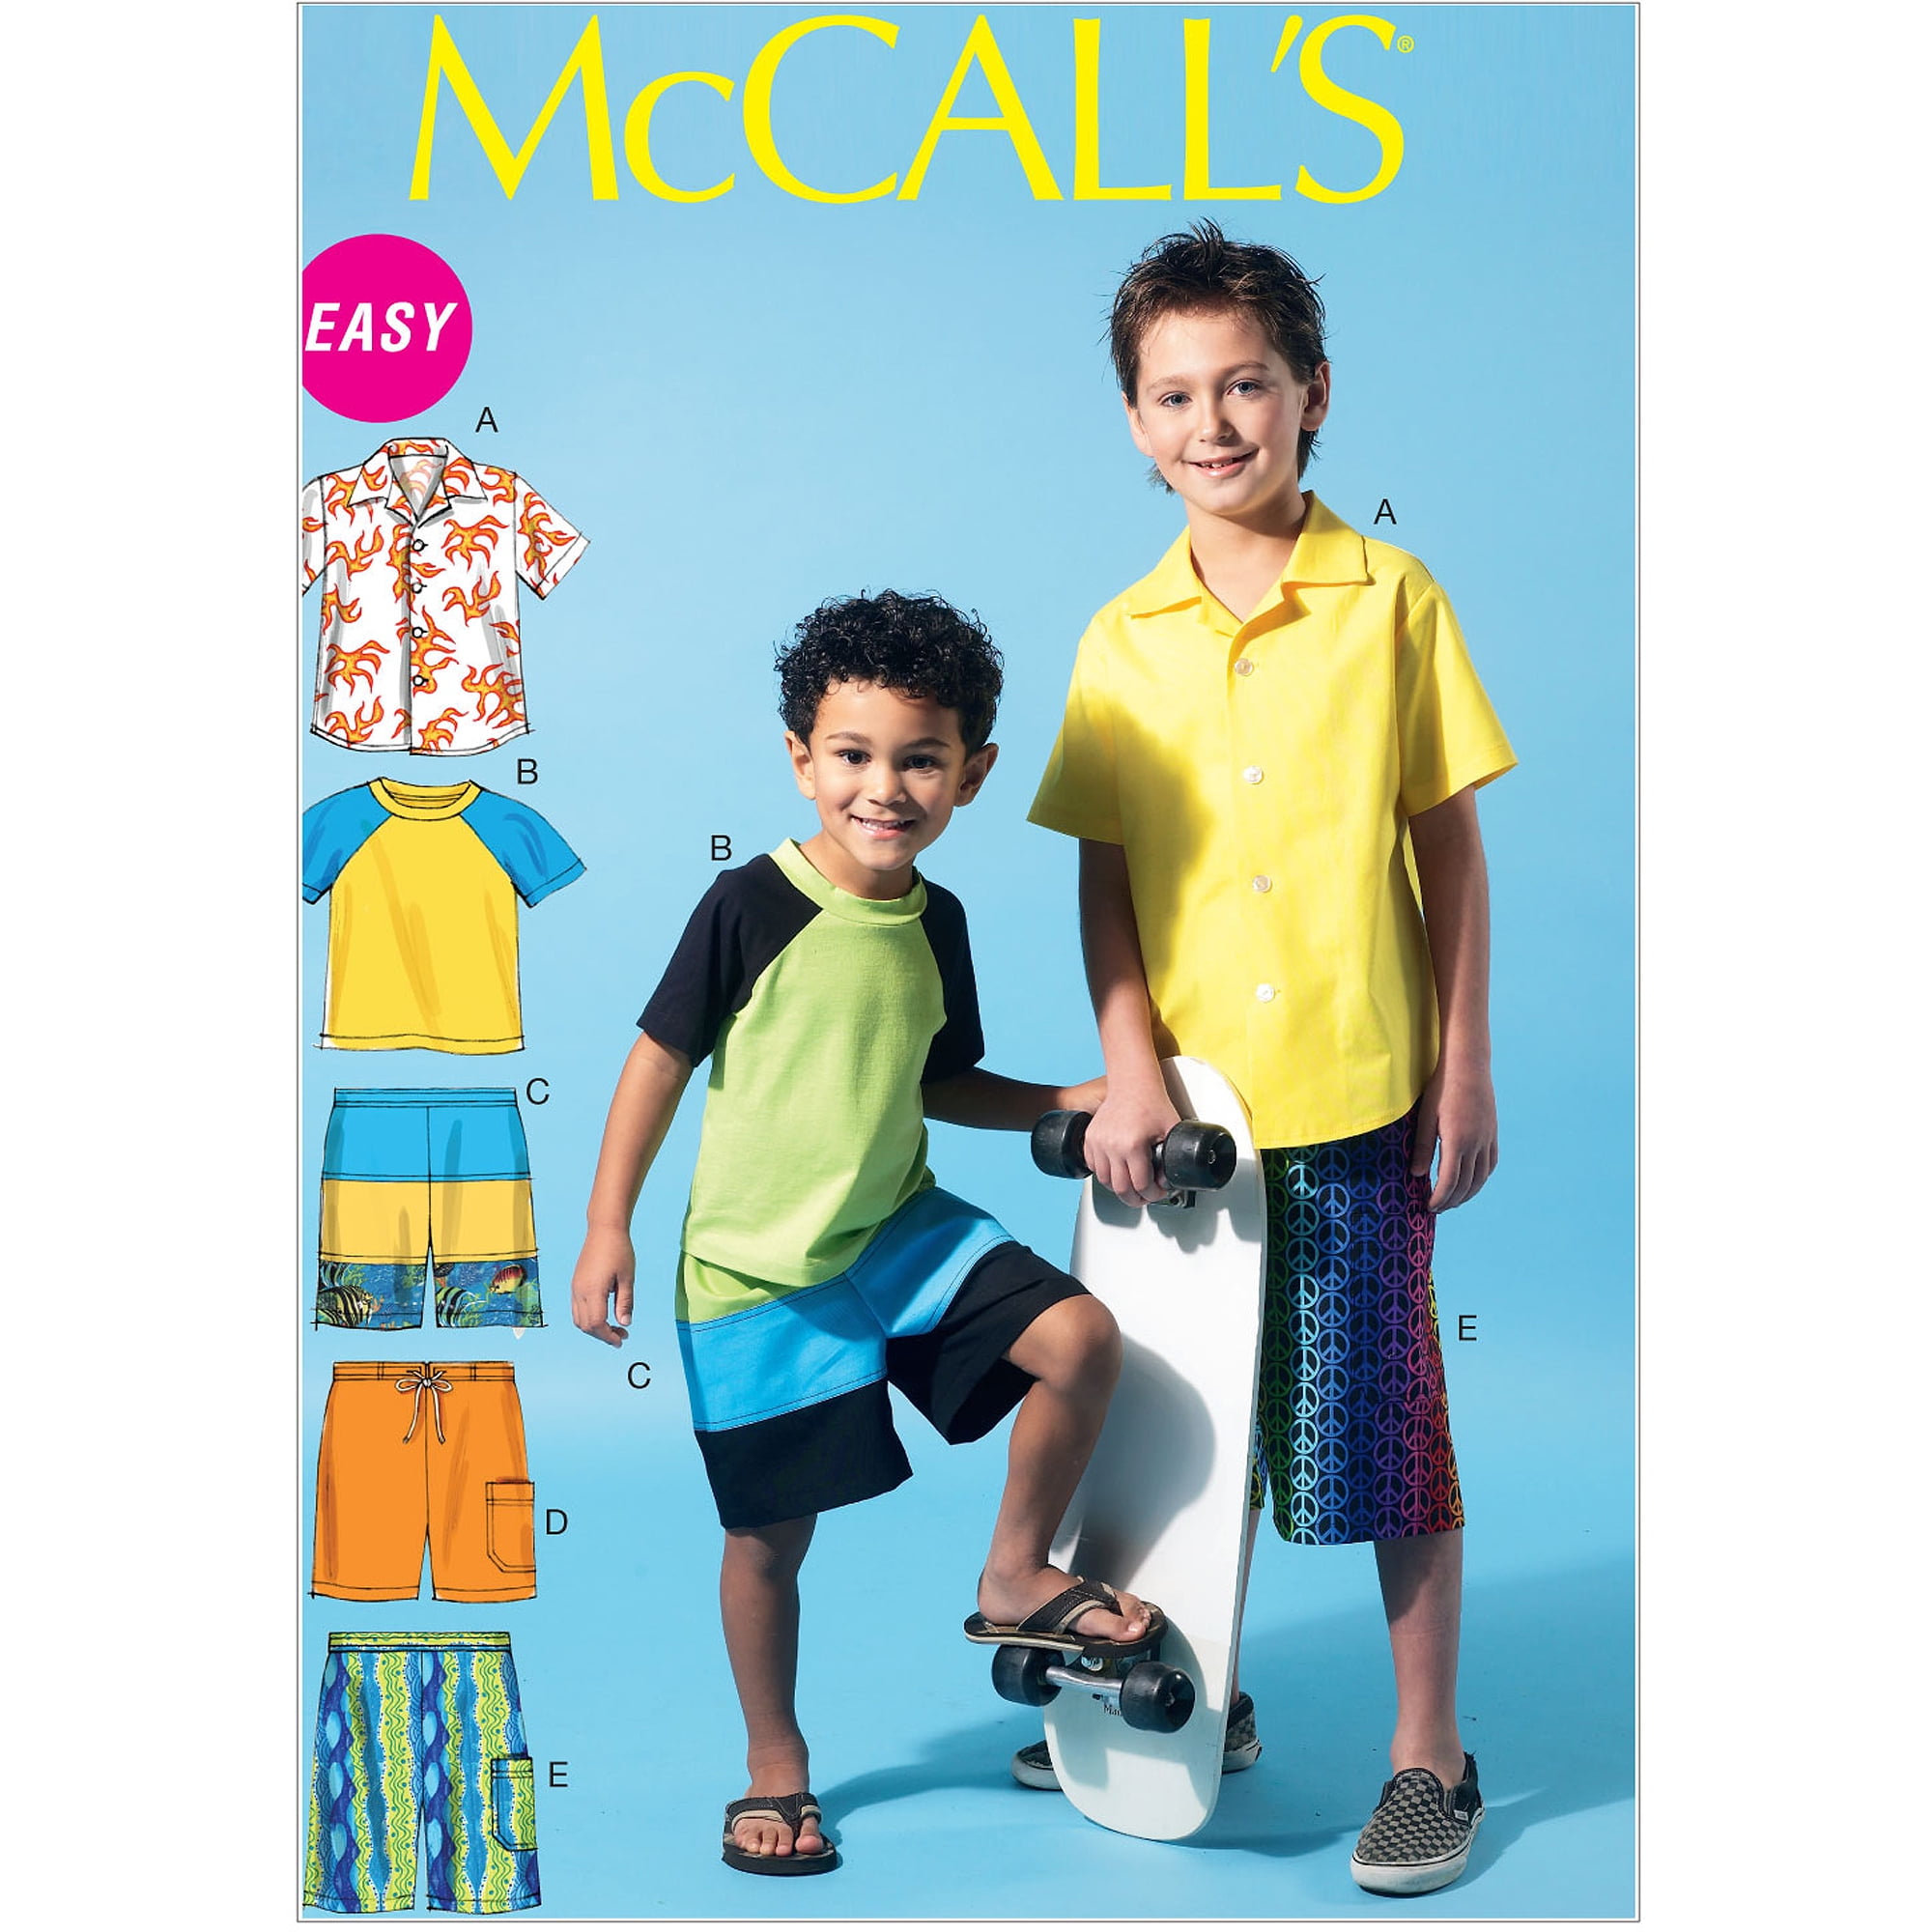 kids clothing casual summer wear McCall's Stitch 'N Save 2727 Vintage Sewing Pattern Children's and Girls' Tops and Shorts Size 7-14